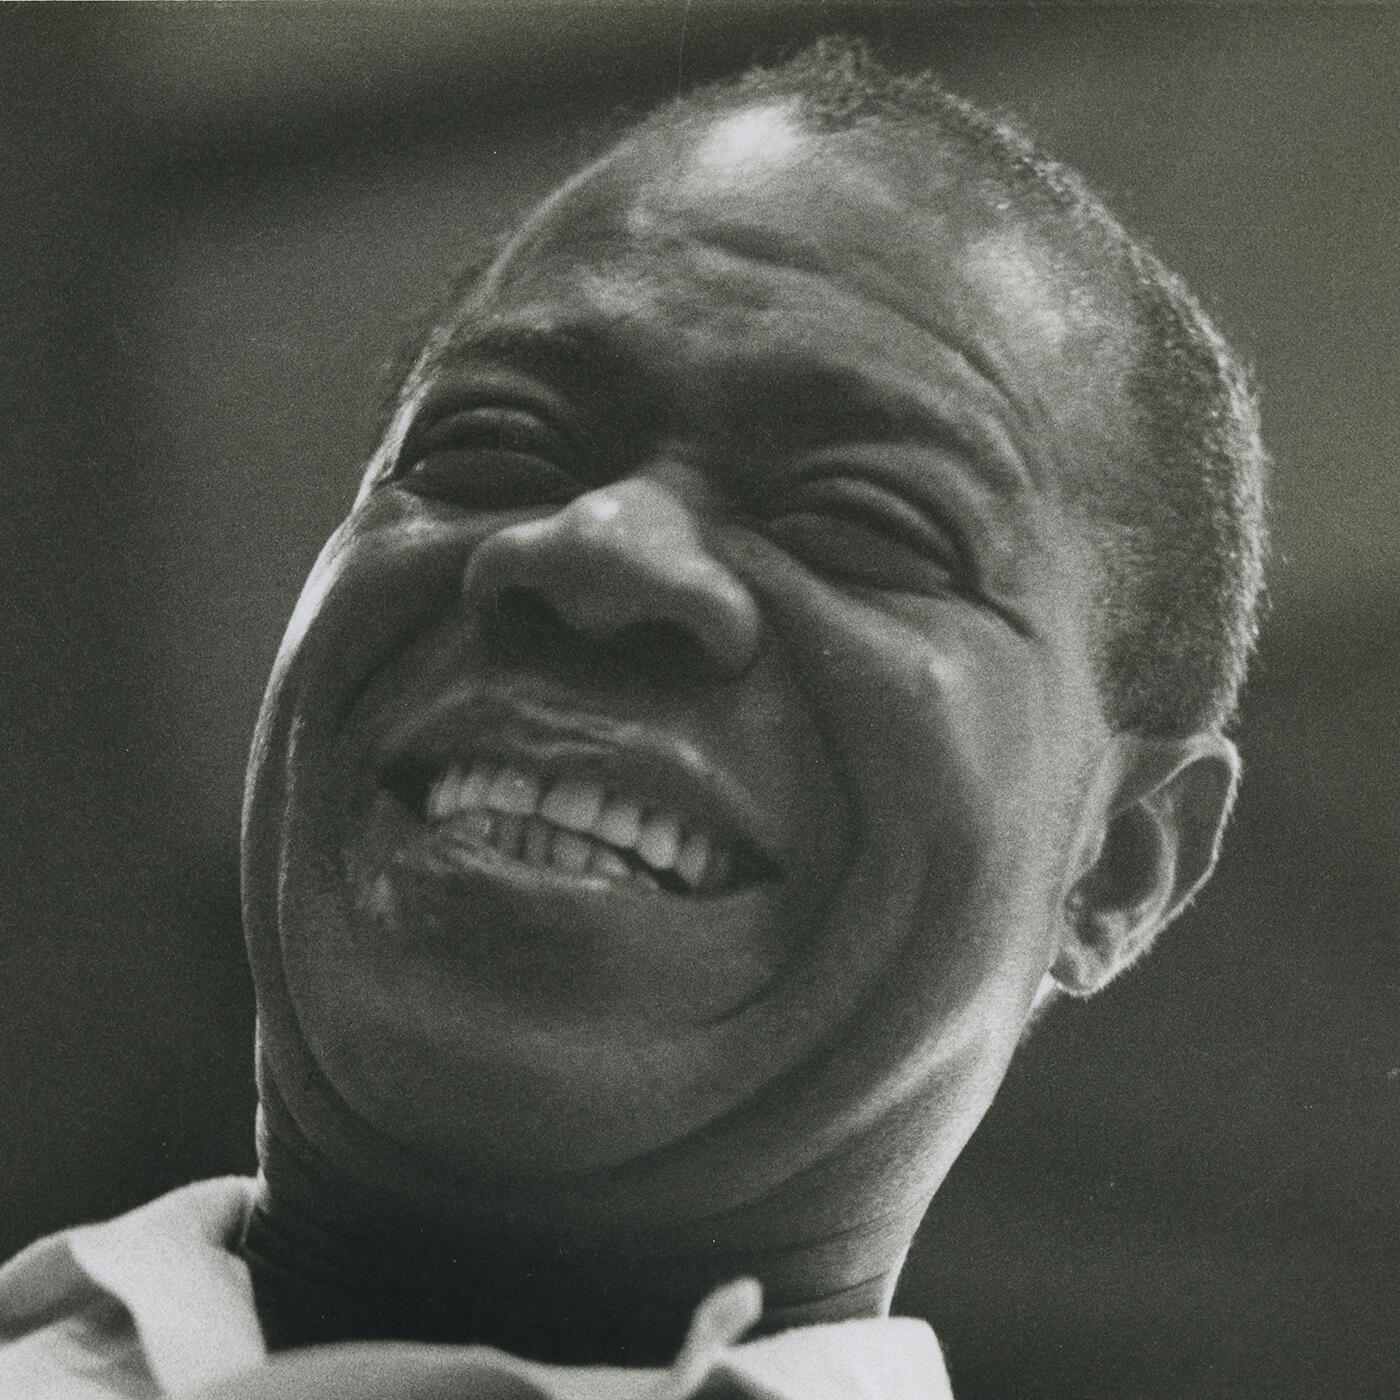 Louis Armstrong Radio: Listen to Free Music & Get The Latest Info | iHeartRadio